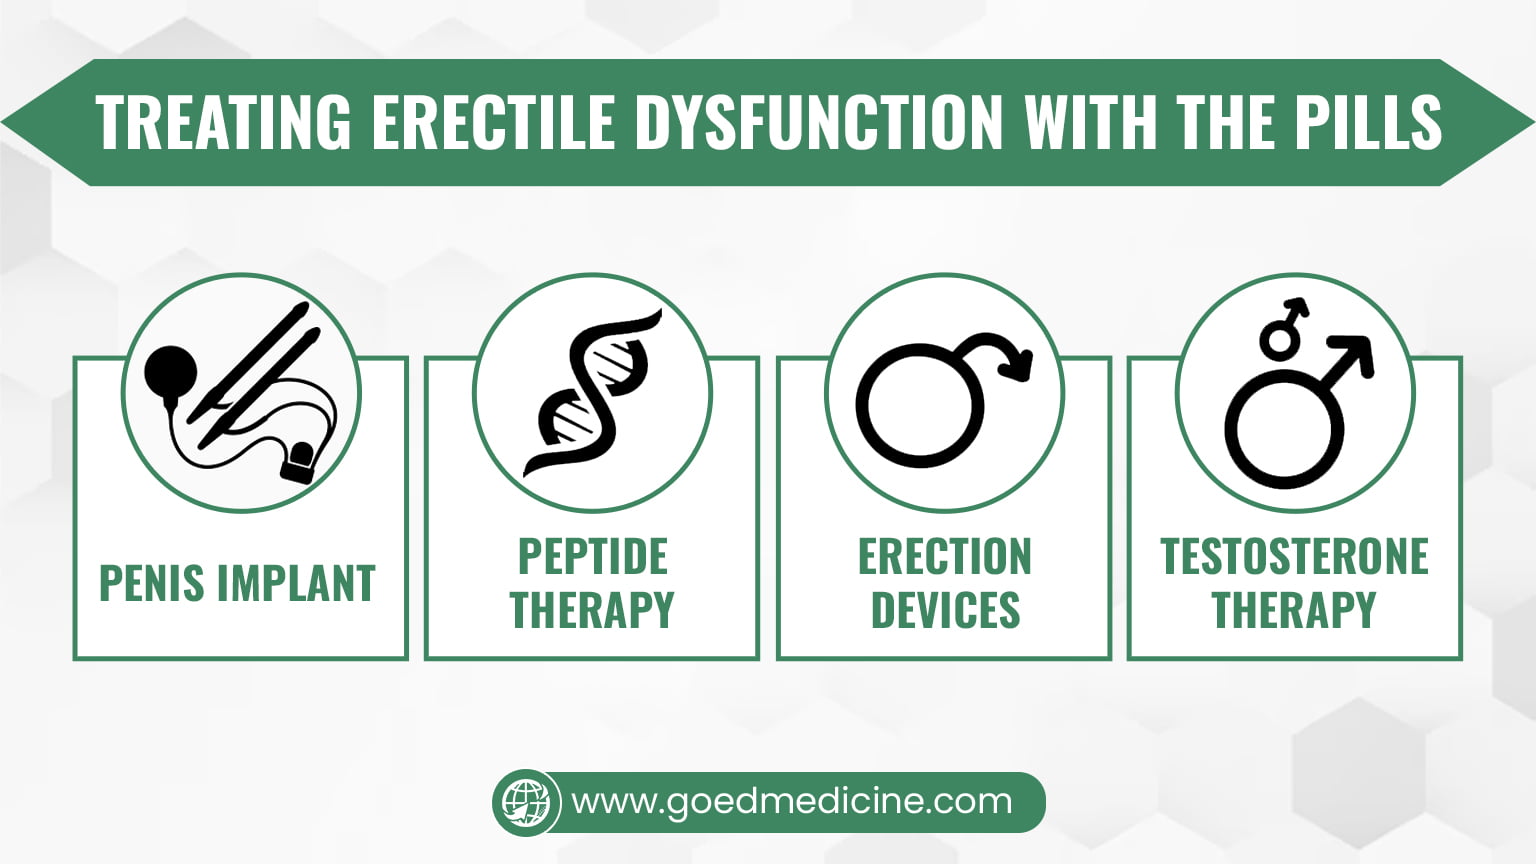 Treating Erectile Dysfunction With the Pills